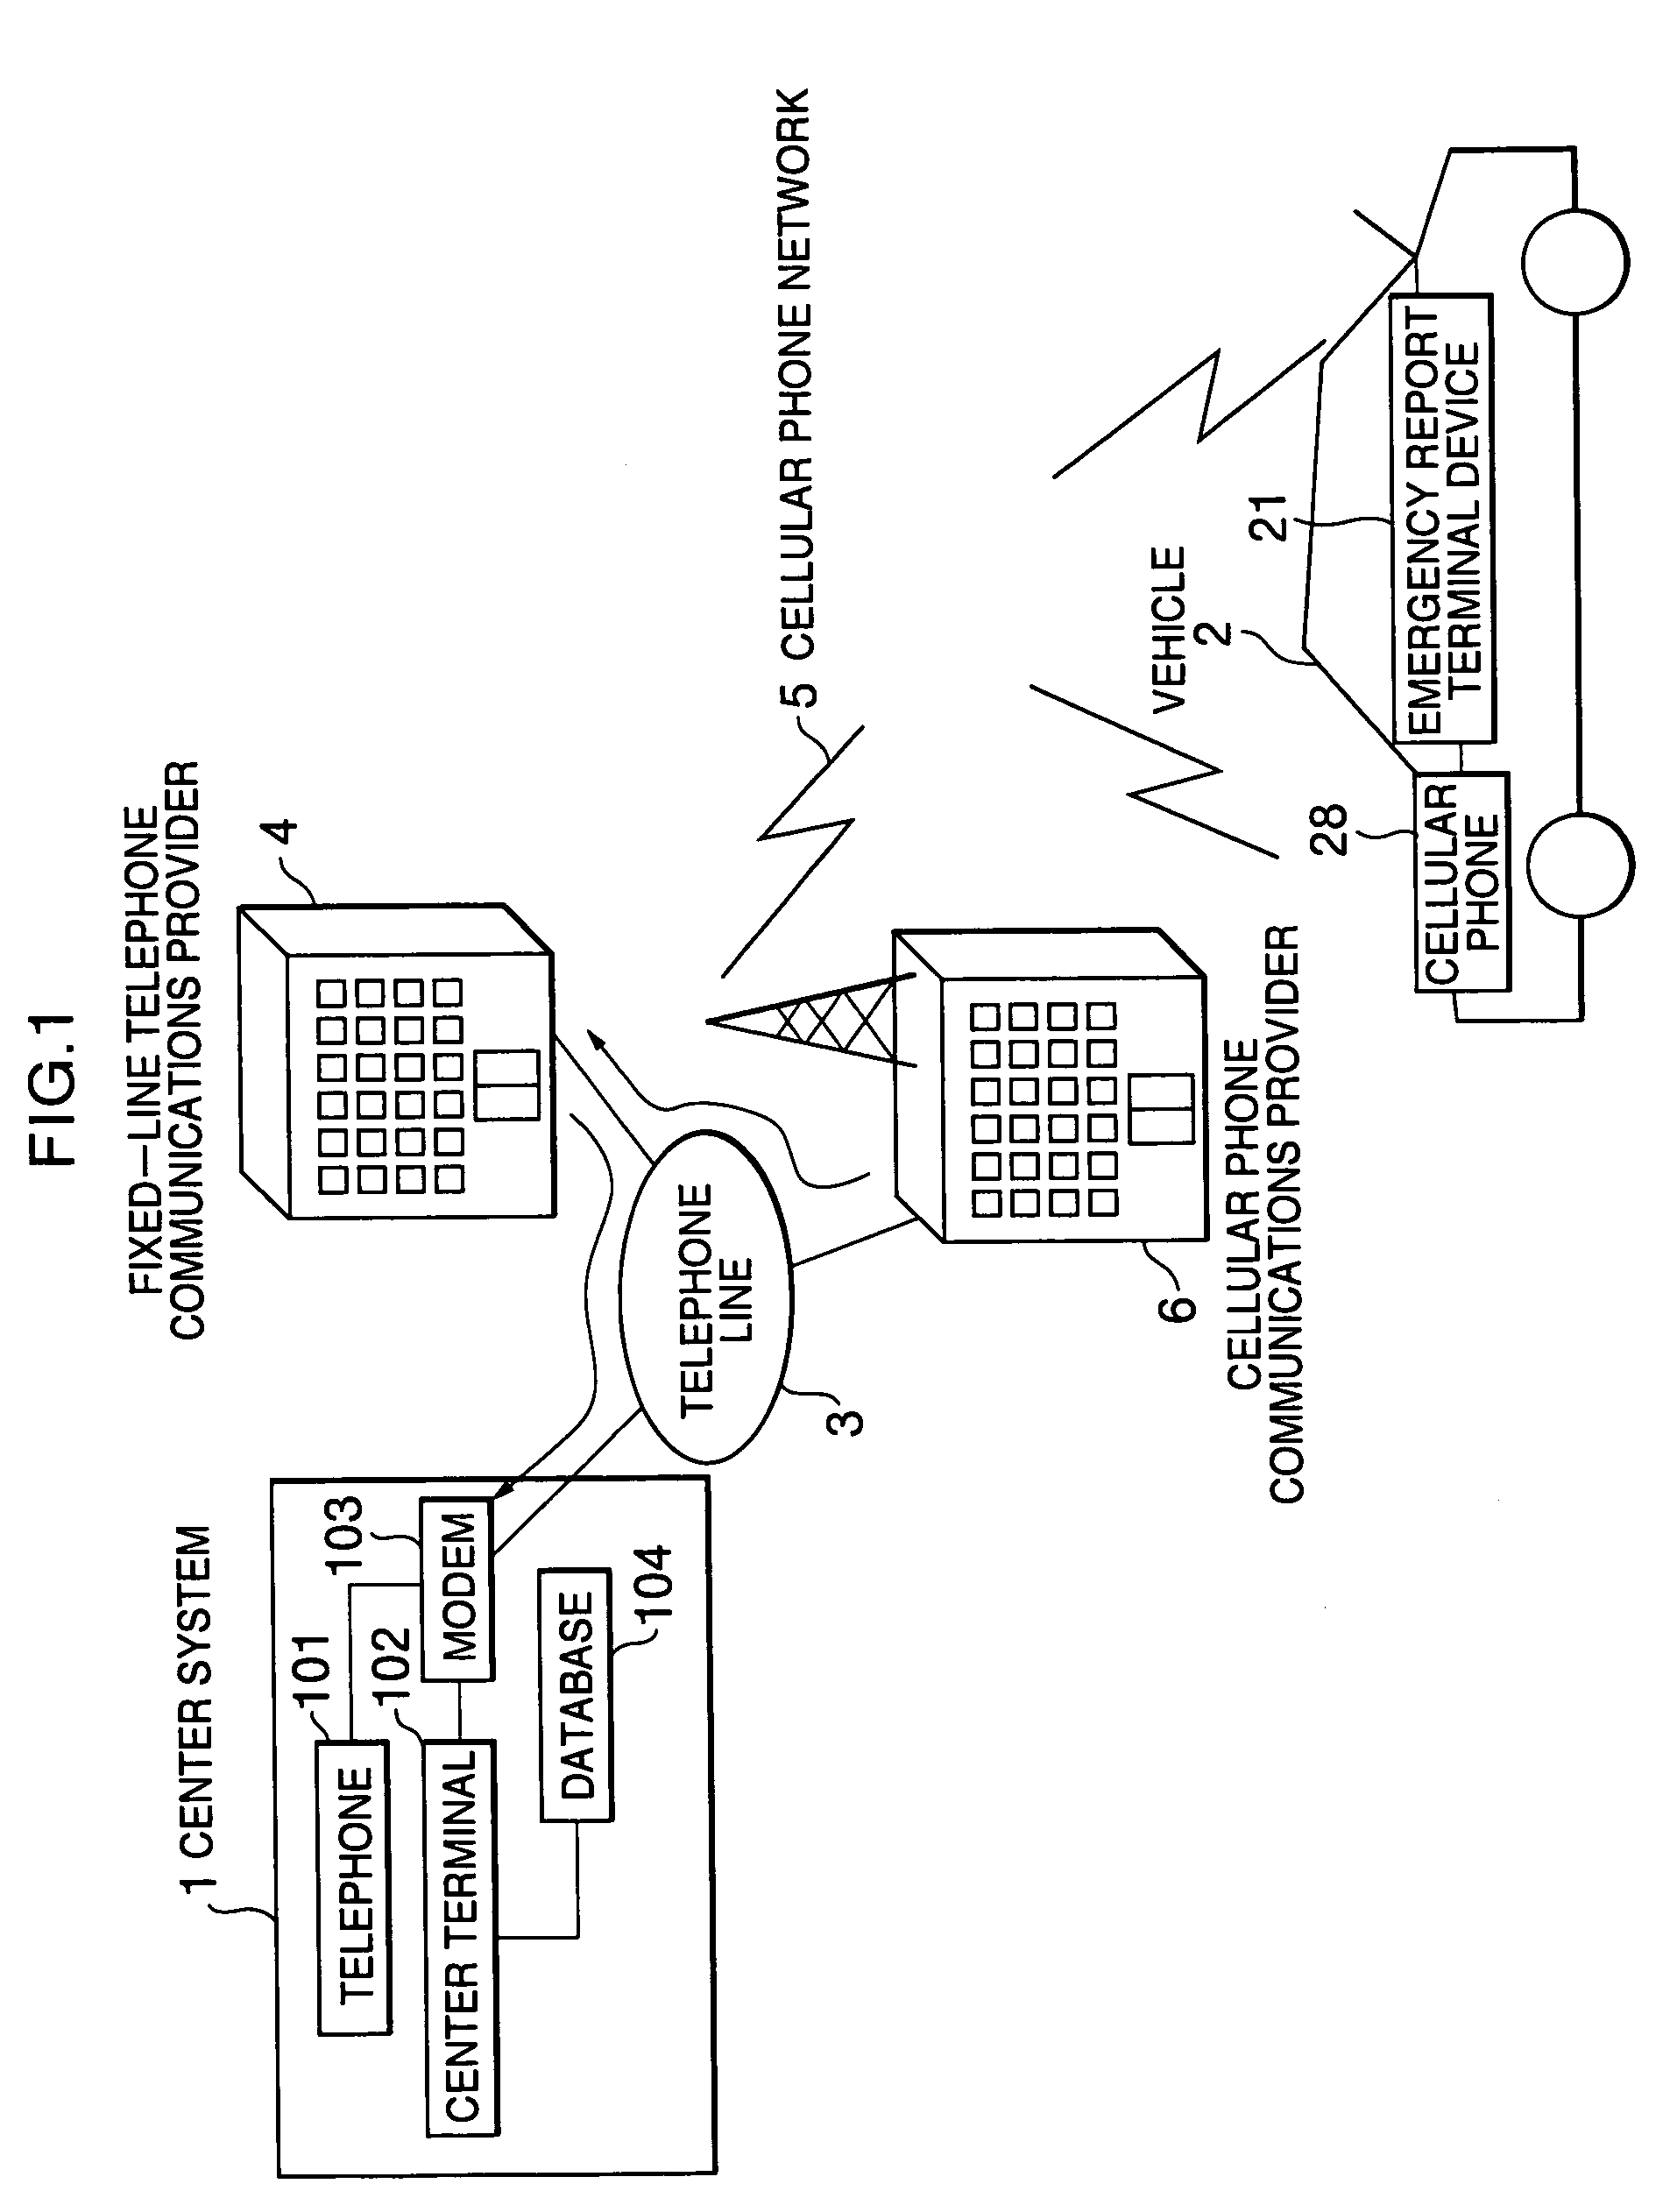 Emergency report terminal device and system